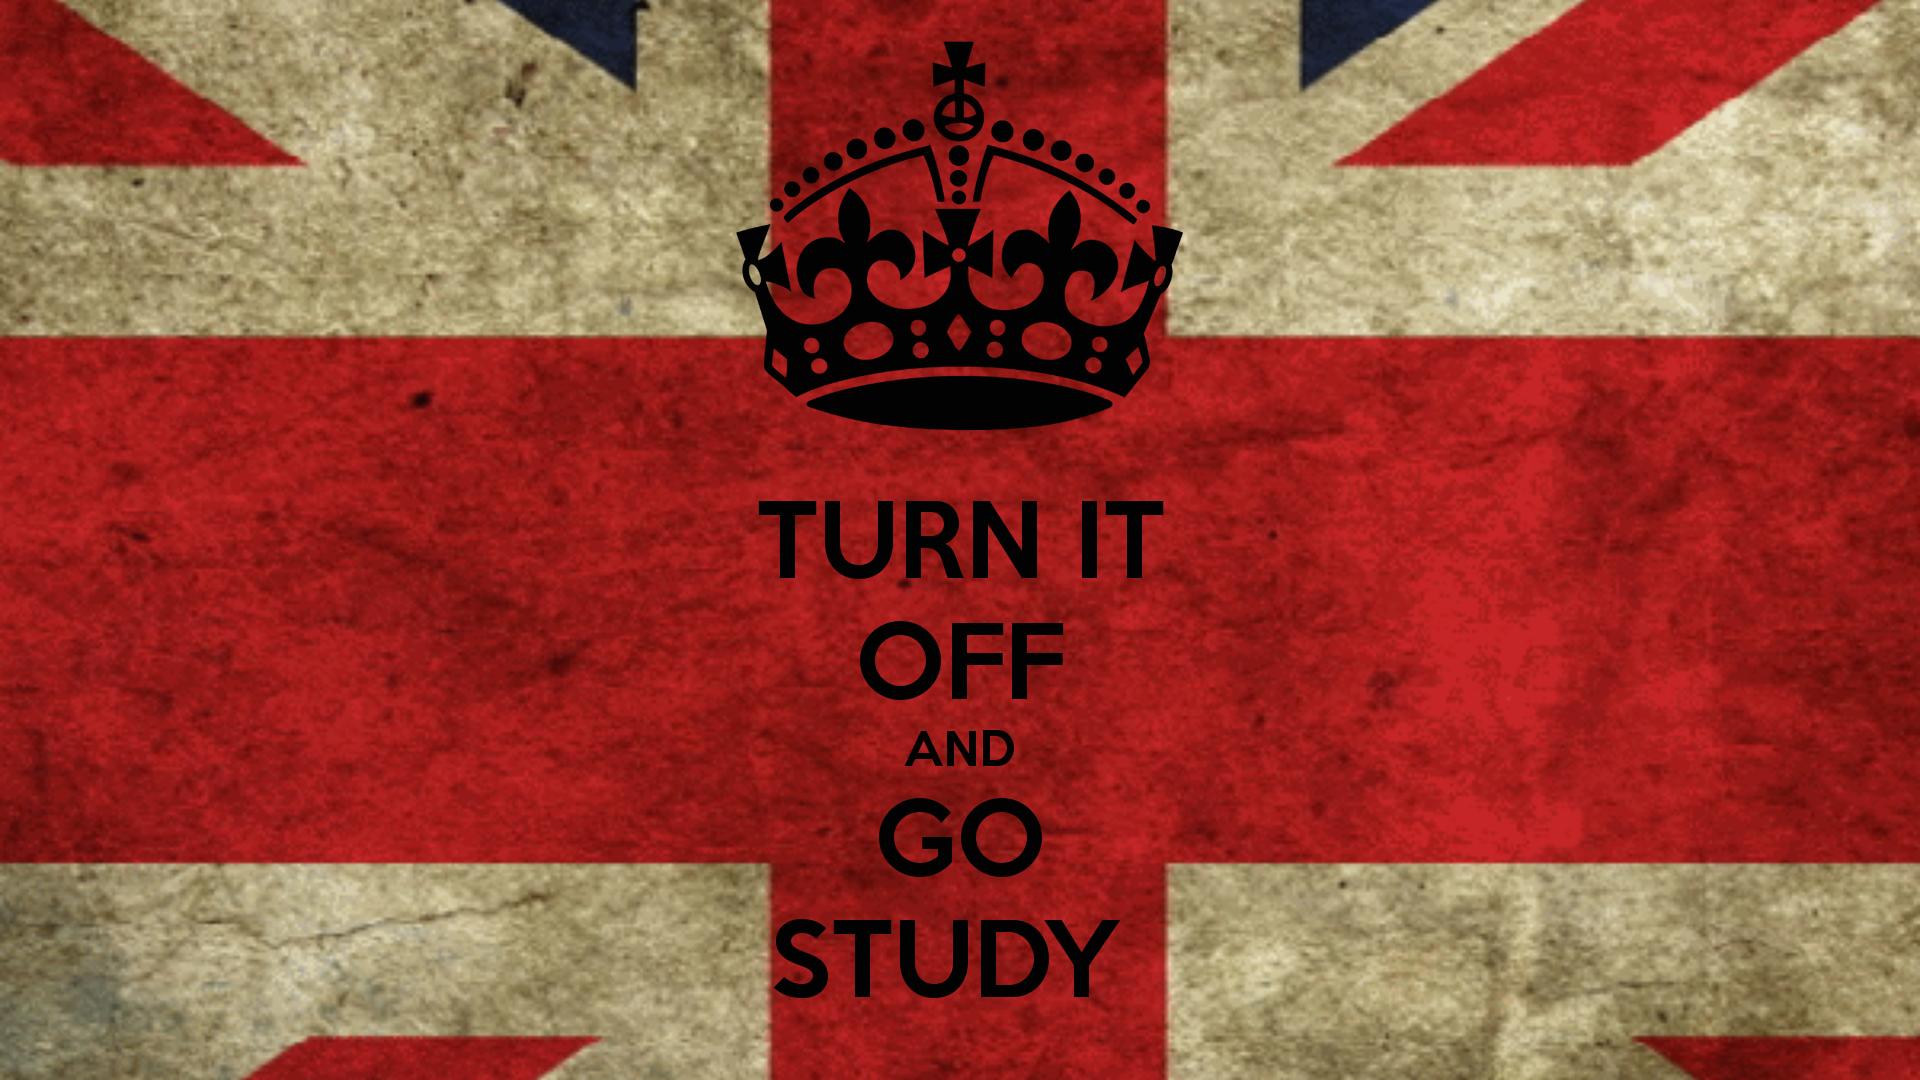 TURN IT OFF AND GO STUDY CALM AND CARRY ON Image Generator